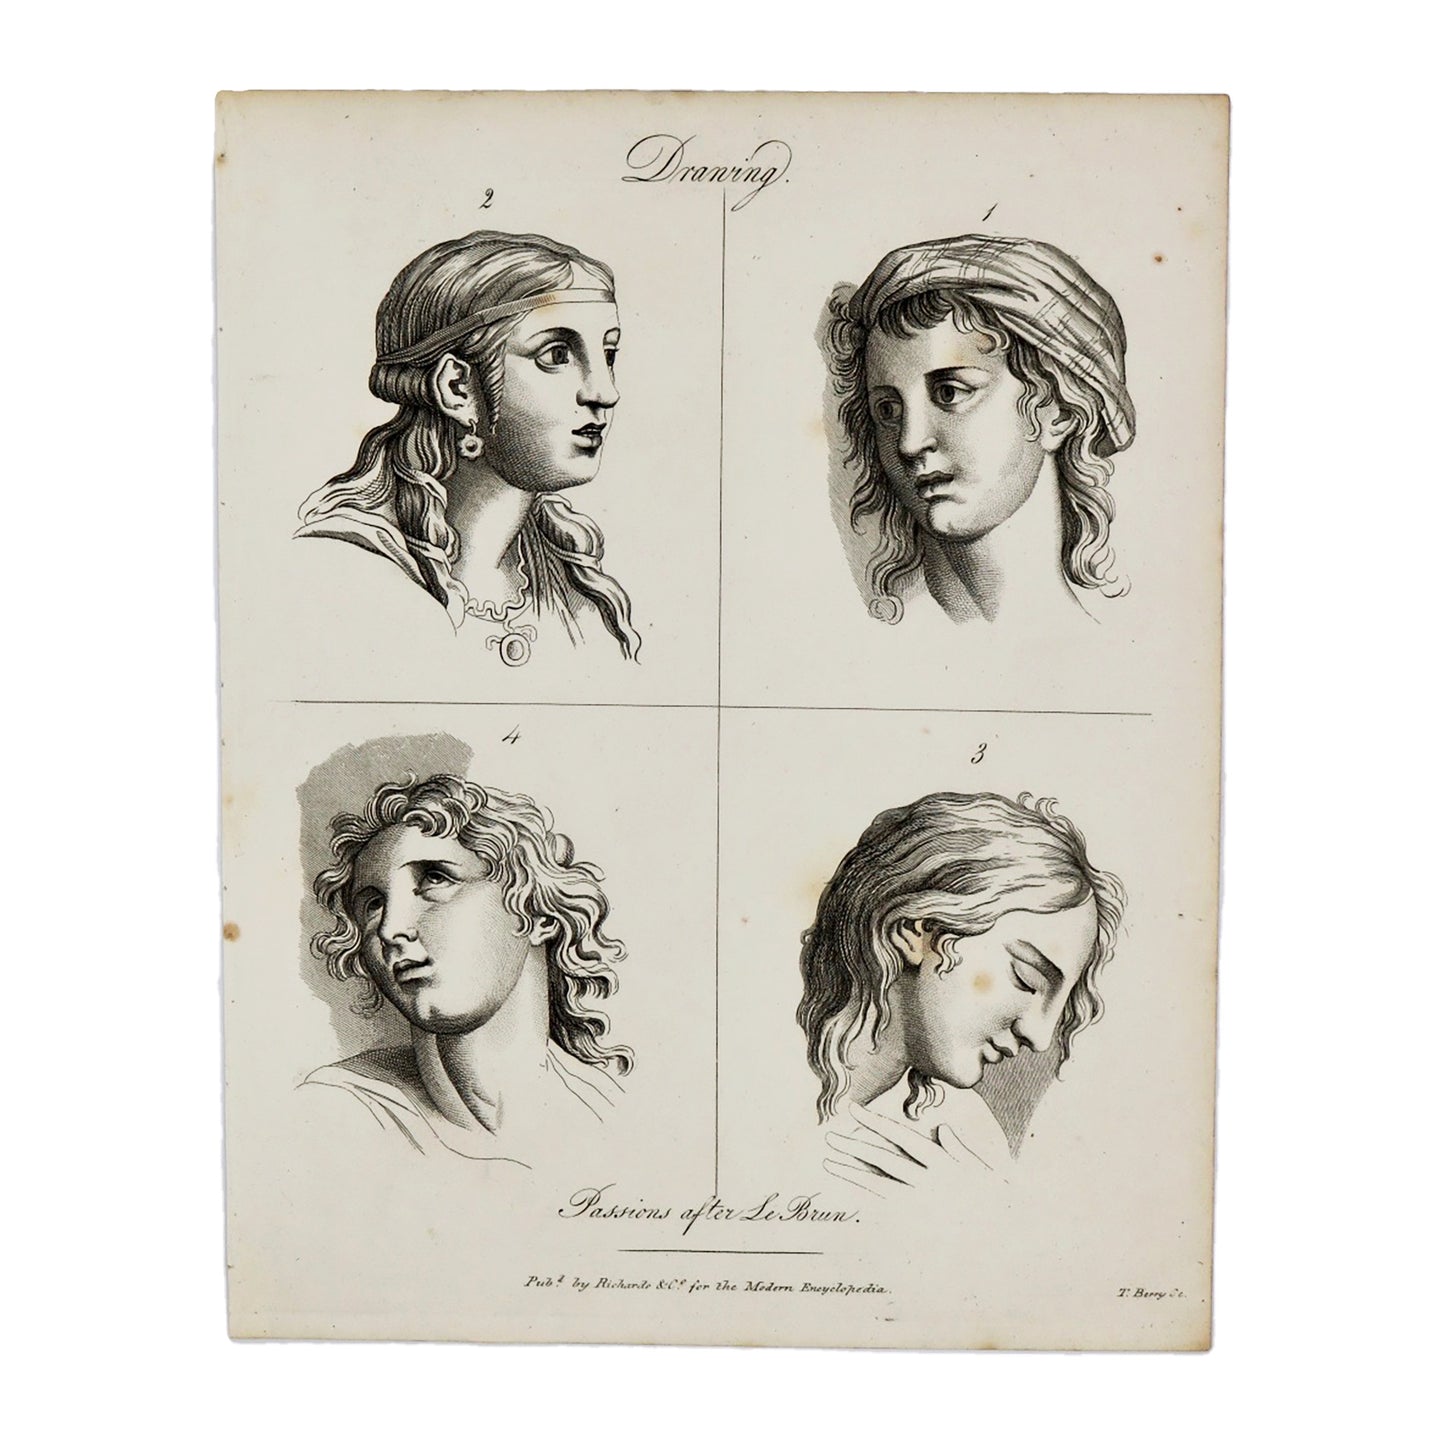 Drawing (Passions After Le Brun 1)  Antique 1820 Engraving from "The Modern Encyclopedia: The Latest Discoveries in each Department of Knowledge."  1820s etching depicting a face from four different angles for drawing purposes.  Measures 10.5 x 8.25 inches.